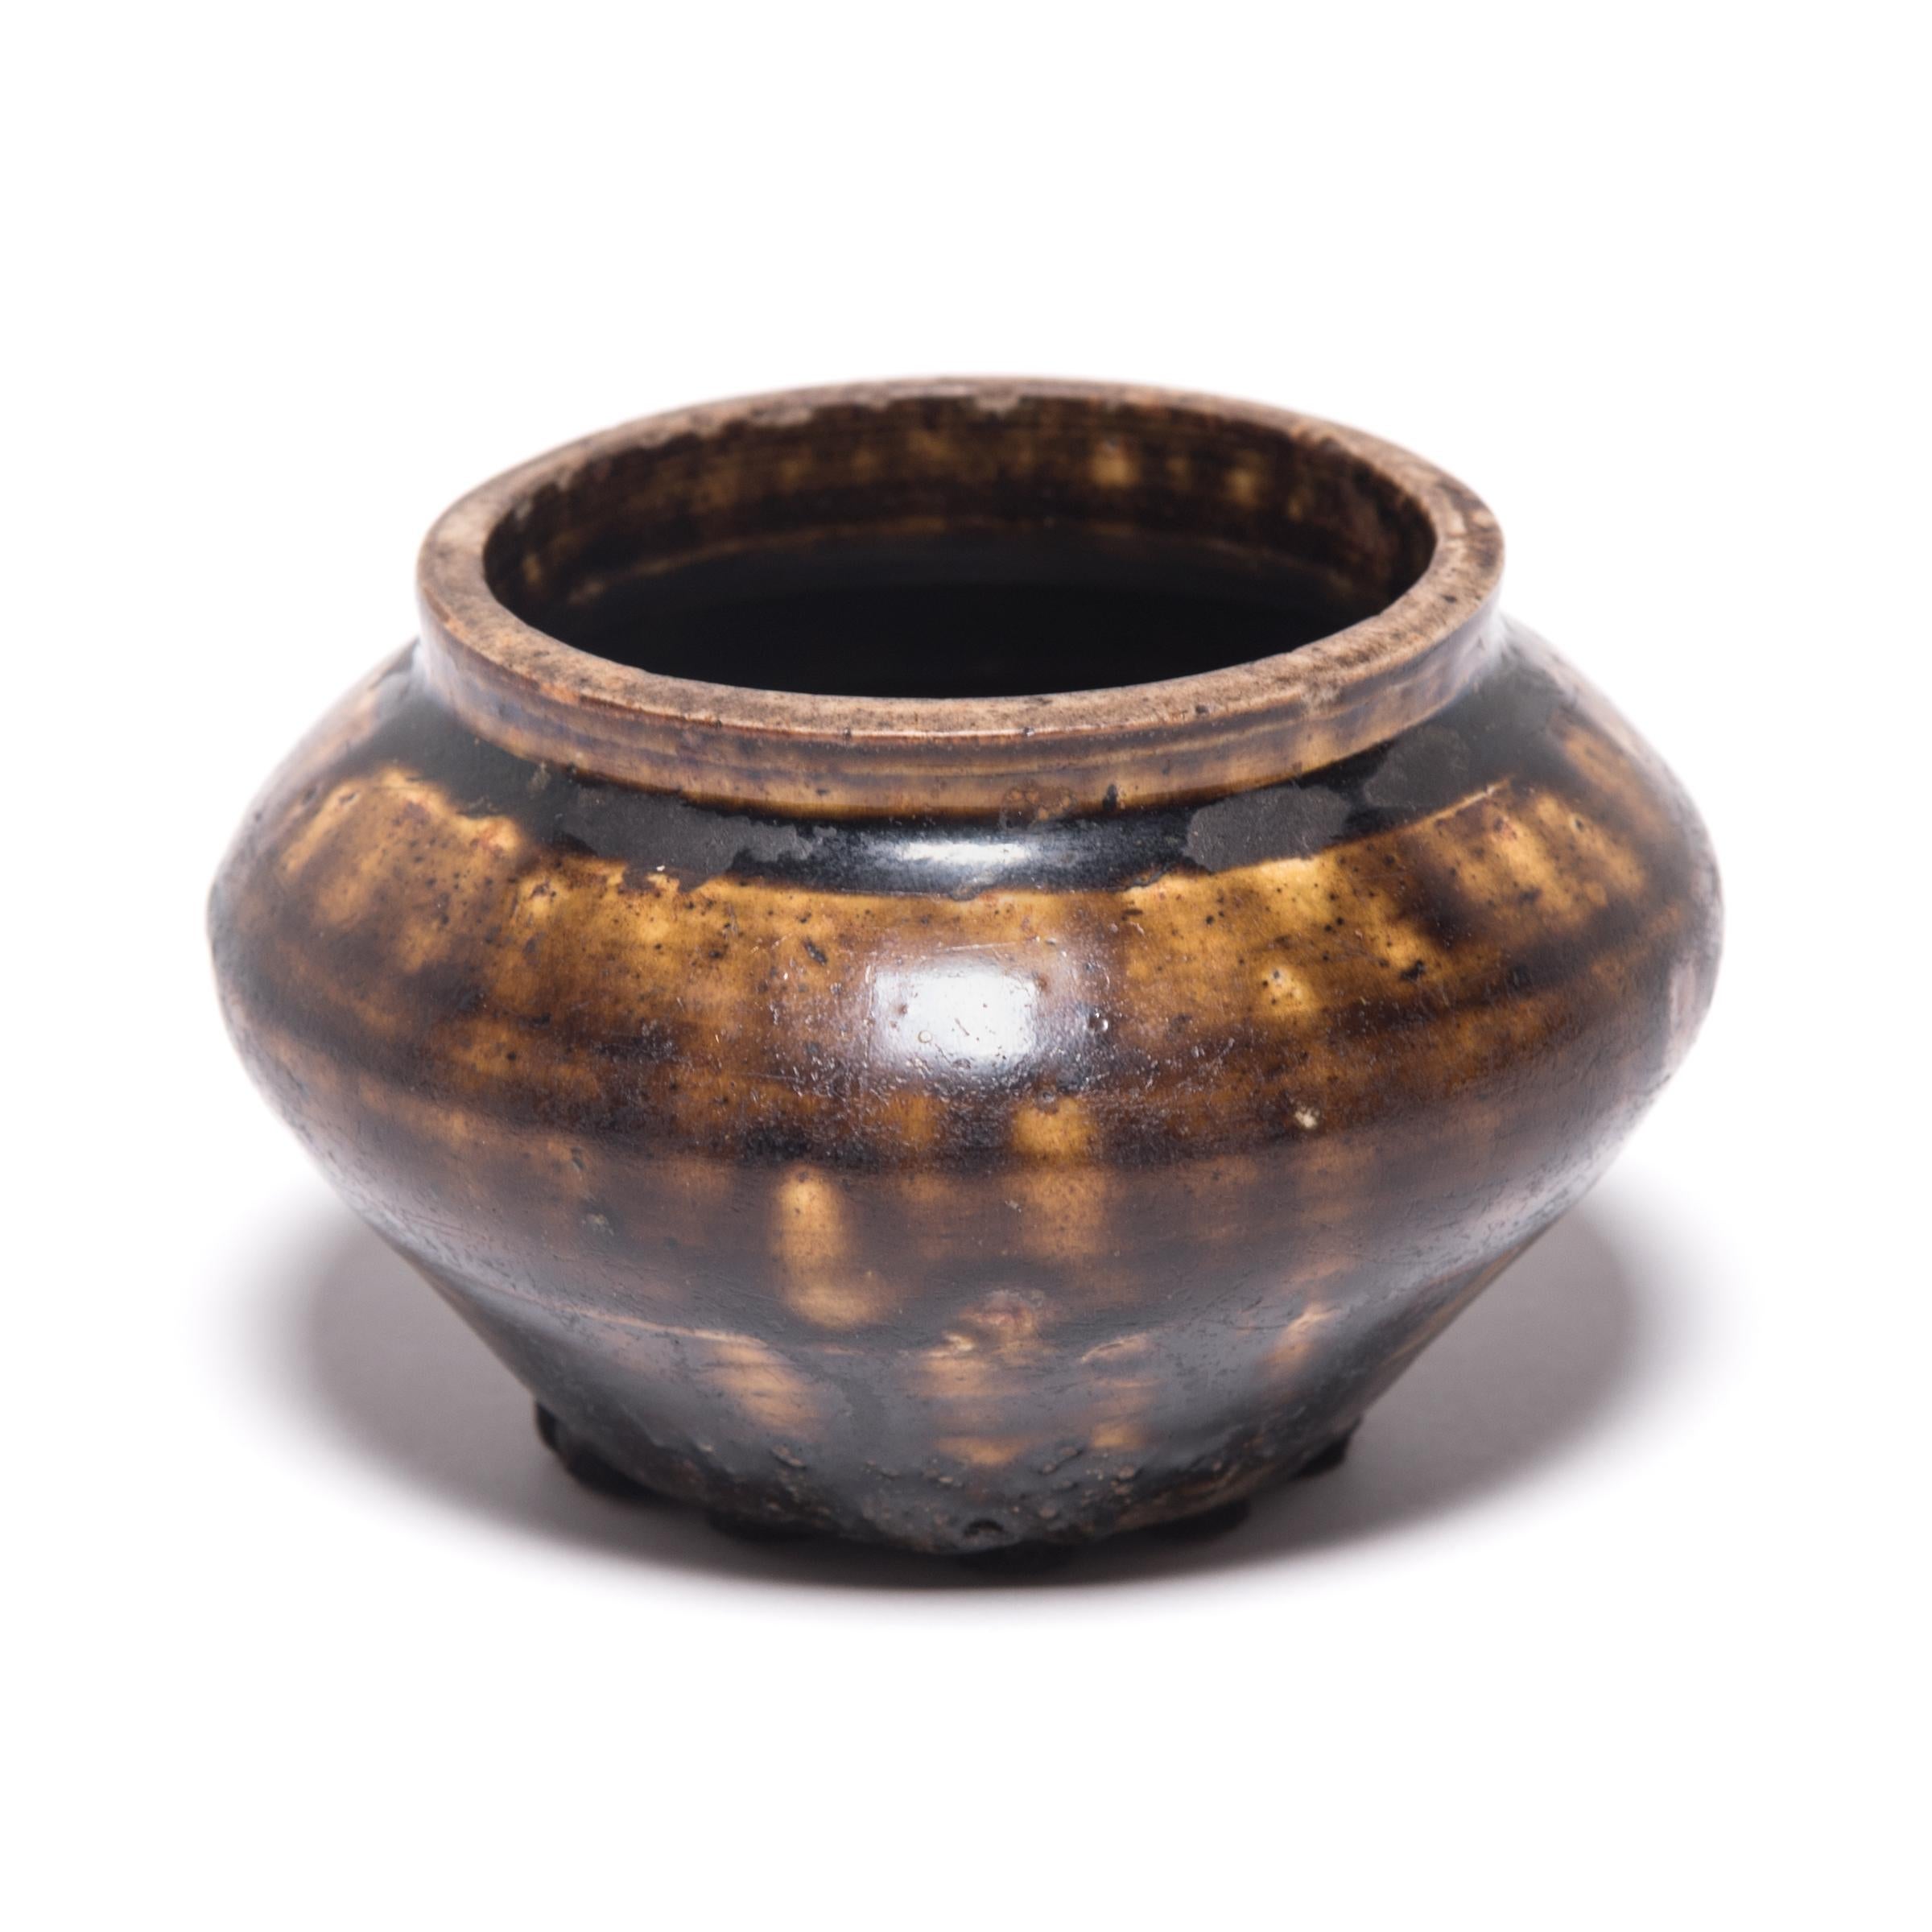 Based on forms tracing back to the Han dynasty, this 19th century vessel emulates the full-bodied shapes and unusual glazing found in ancient ceramics. Marked with barren spots, a rich, brown glaze clings to the pot’s broad shoulders, pooling